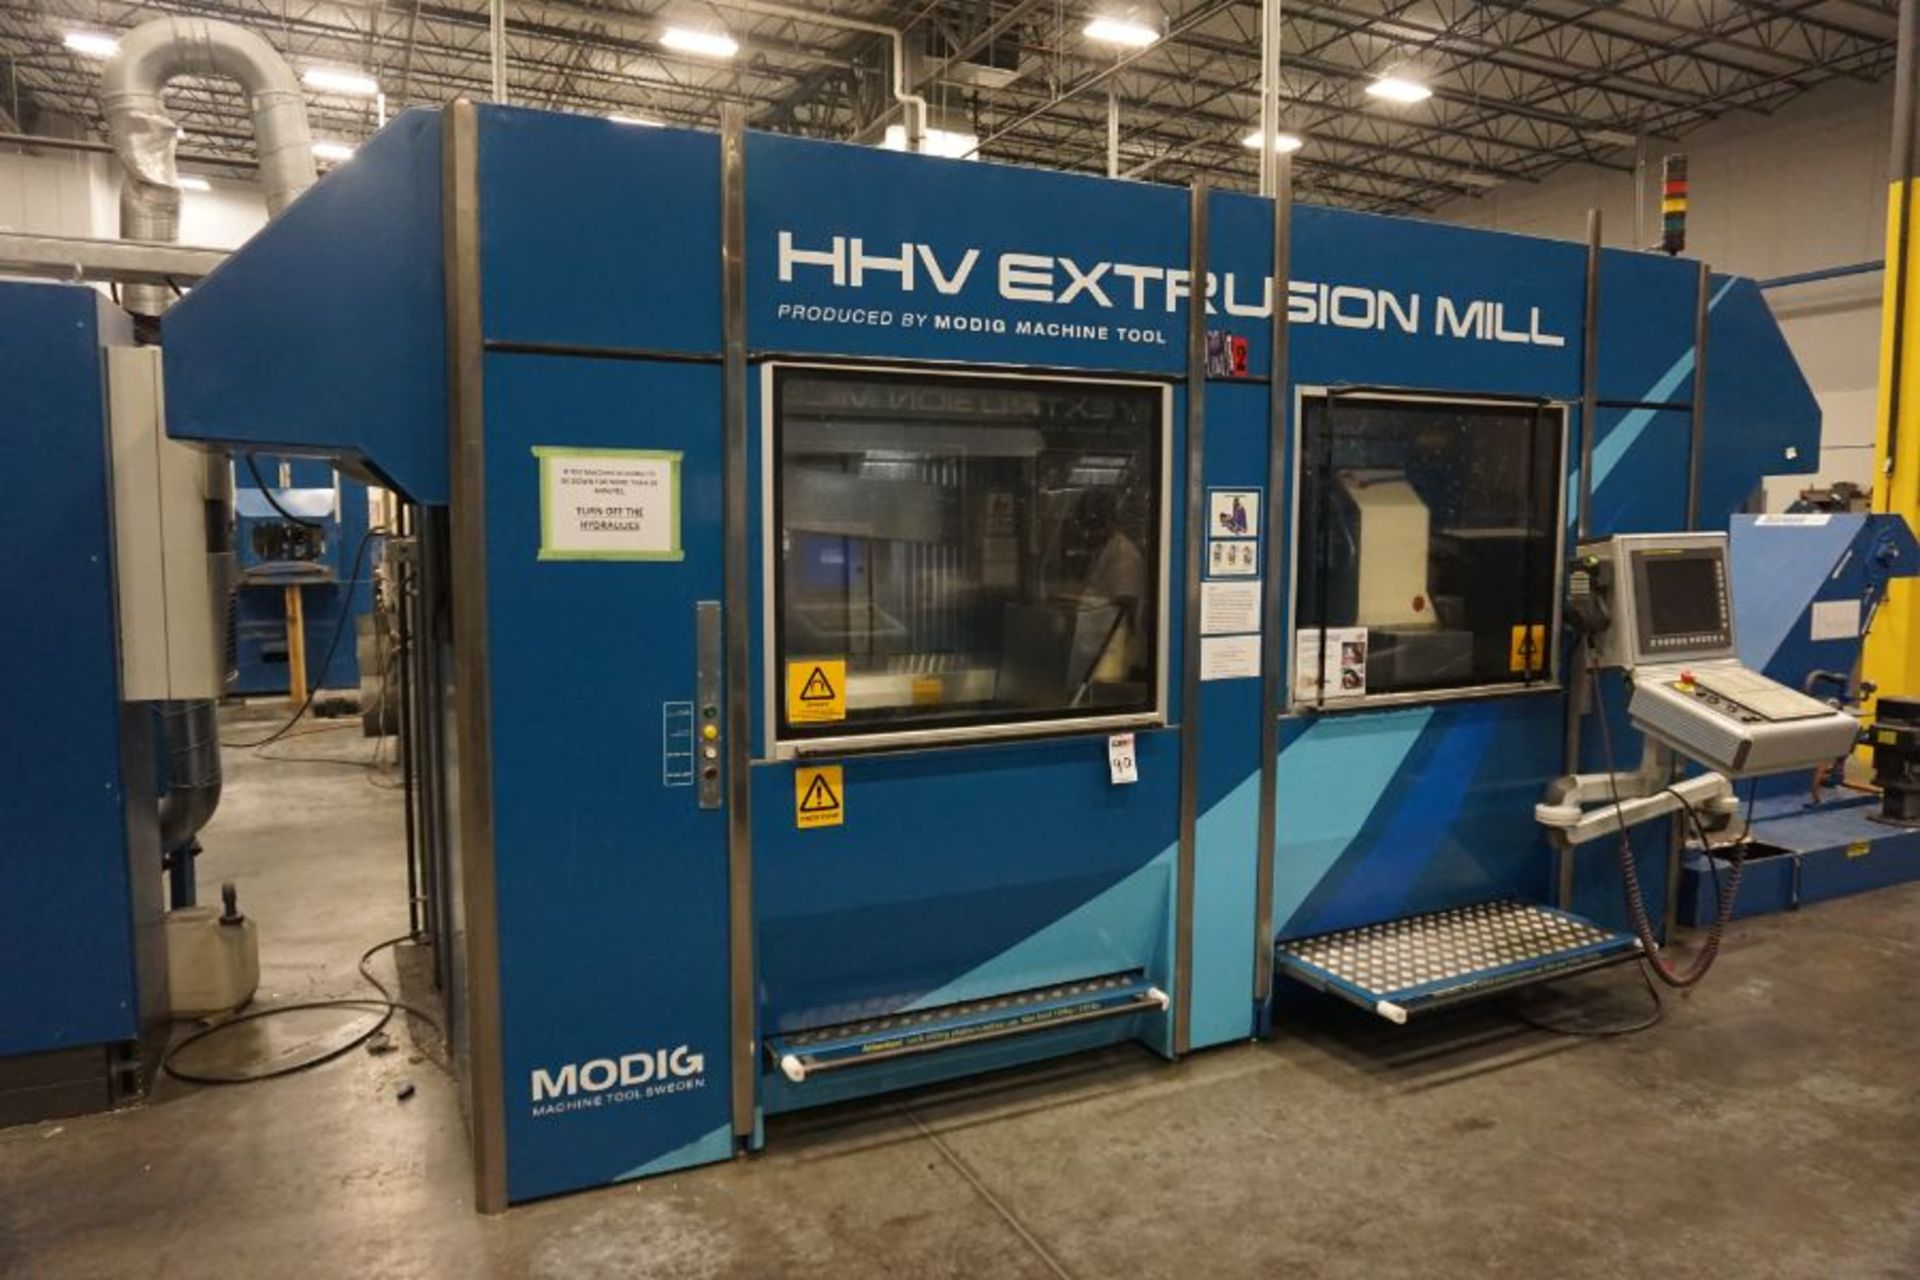 Modig HHV 4-Axis High Speed Extrusion Mill, Fanuc 30i Model B, Fischer 1700 mm 30K Spindle, 28000